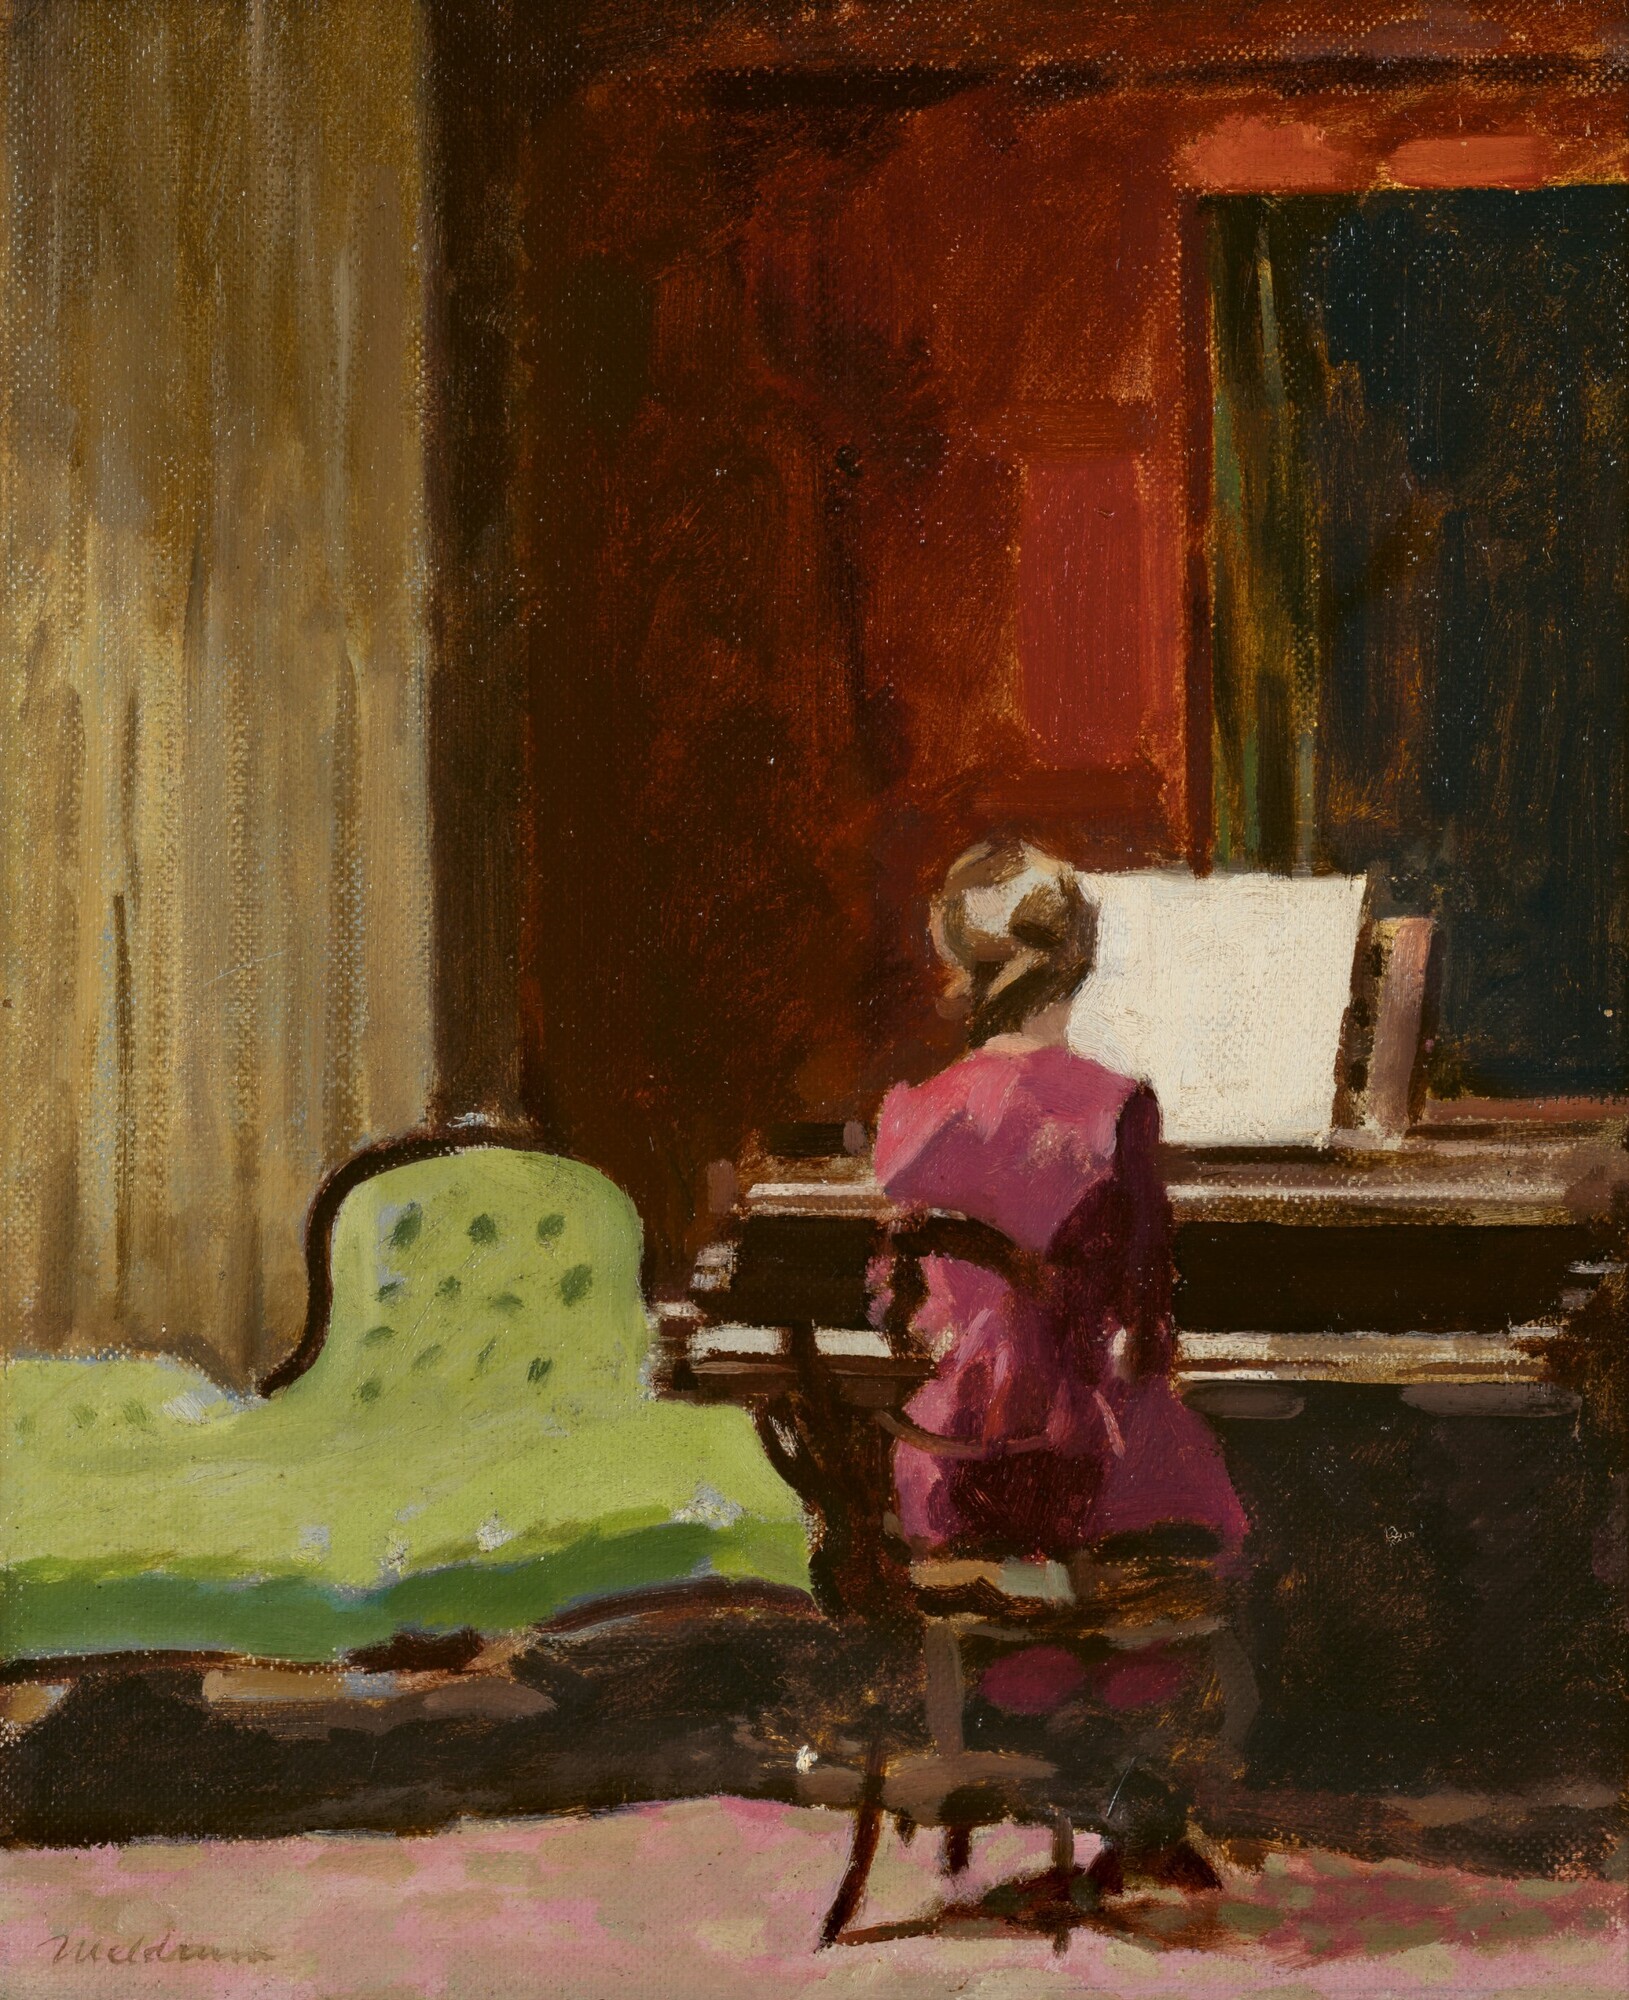 Max Meldrum, <em>Ida in the studio</em>, 1943, oil on board, 46.0 x 38.0 cm, private collection. Image courtesy of Deutscher and Hackett. Copyright Estate of the Artist.